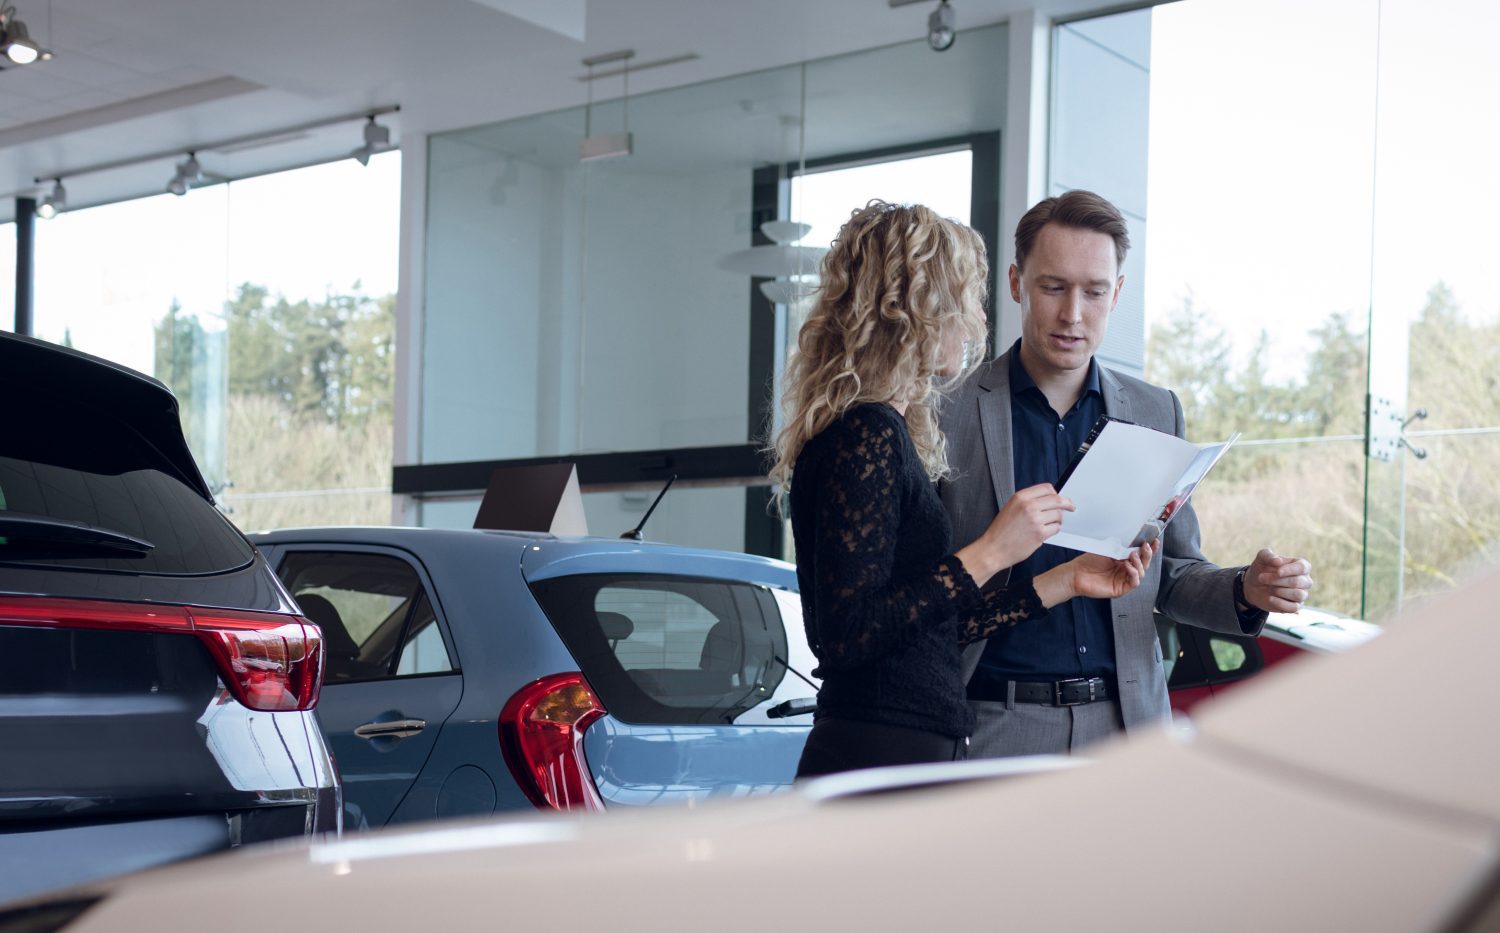 Dealer optimism declined swiftly over the fourth quarter as the retail automotive community grappled with interest rates, inflation and sales.